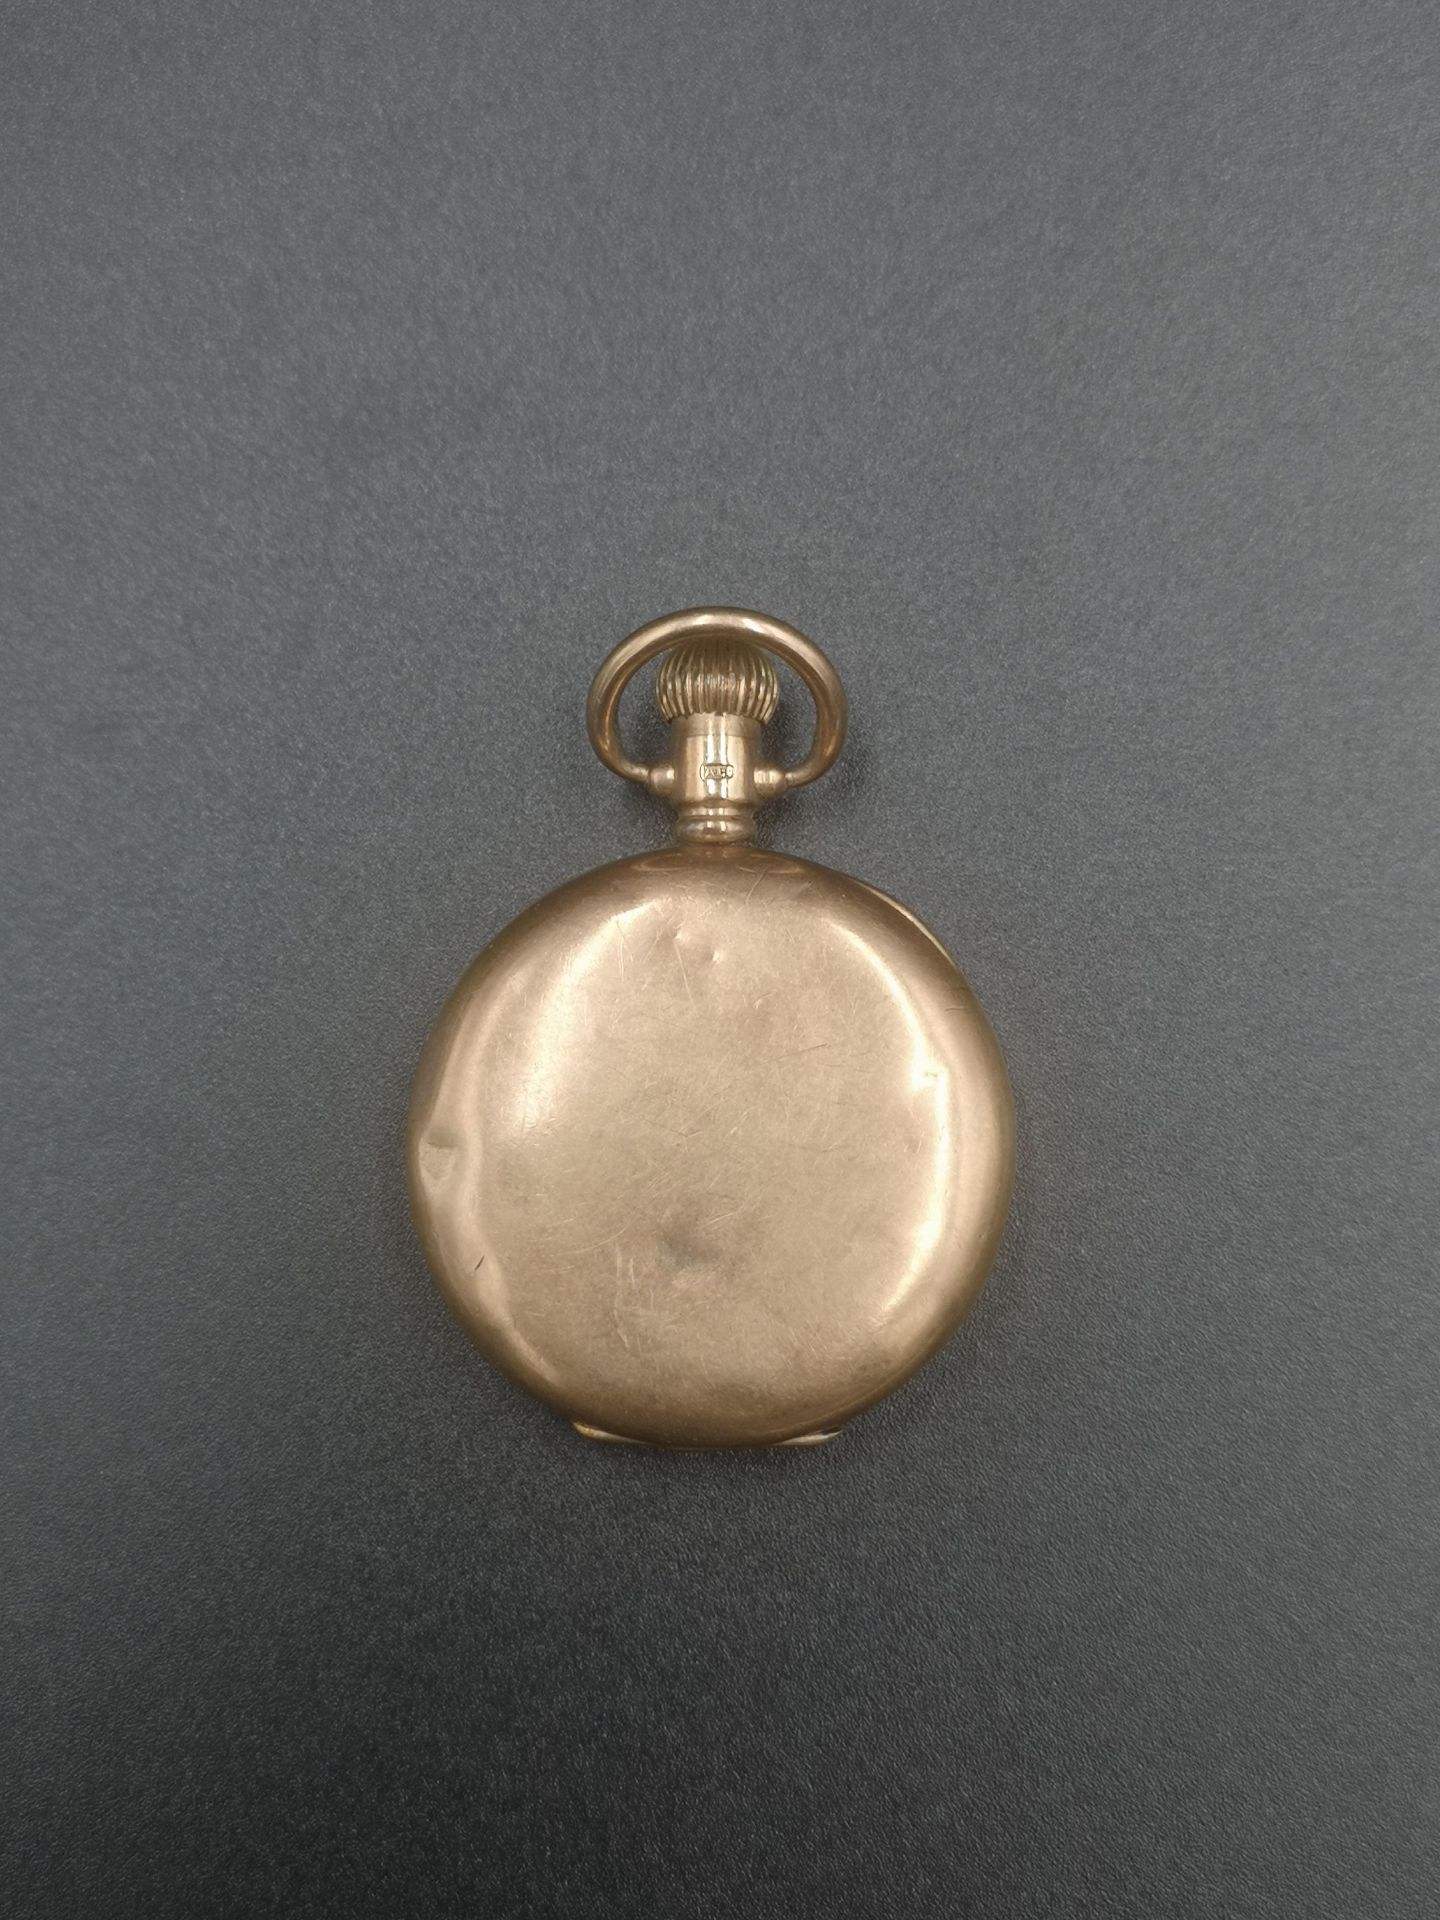 9ct gold pocket watch - Image 6 of 6